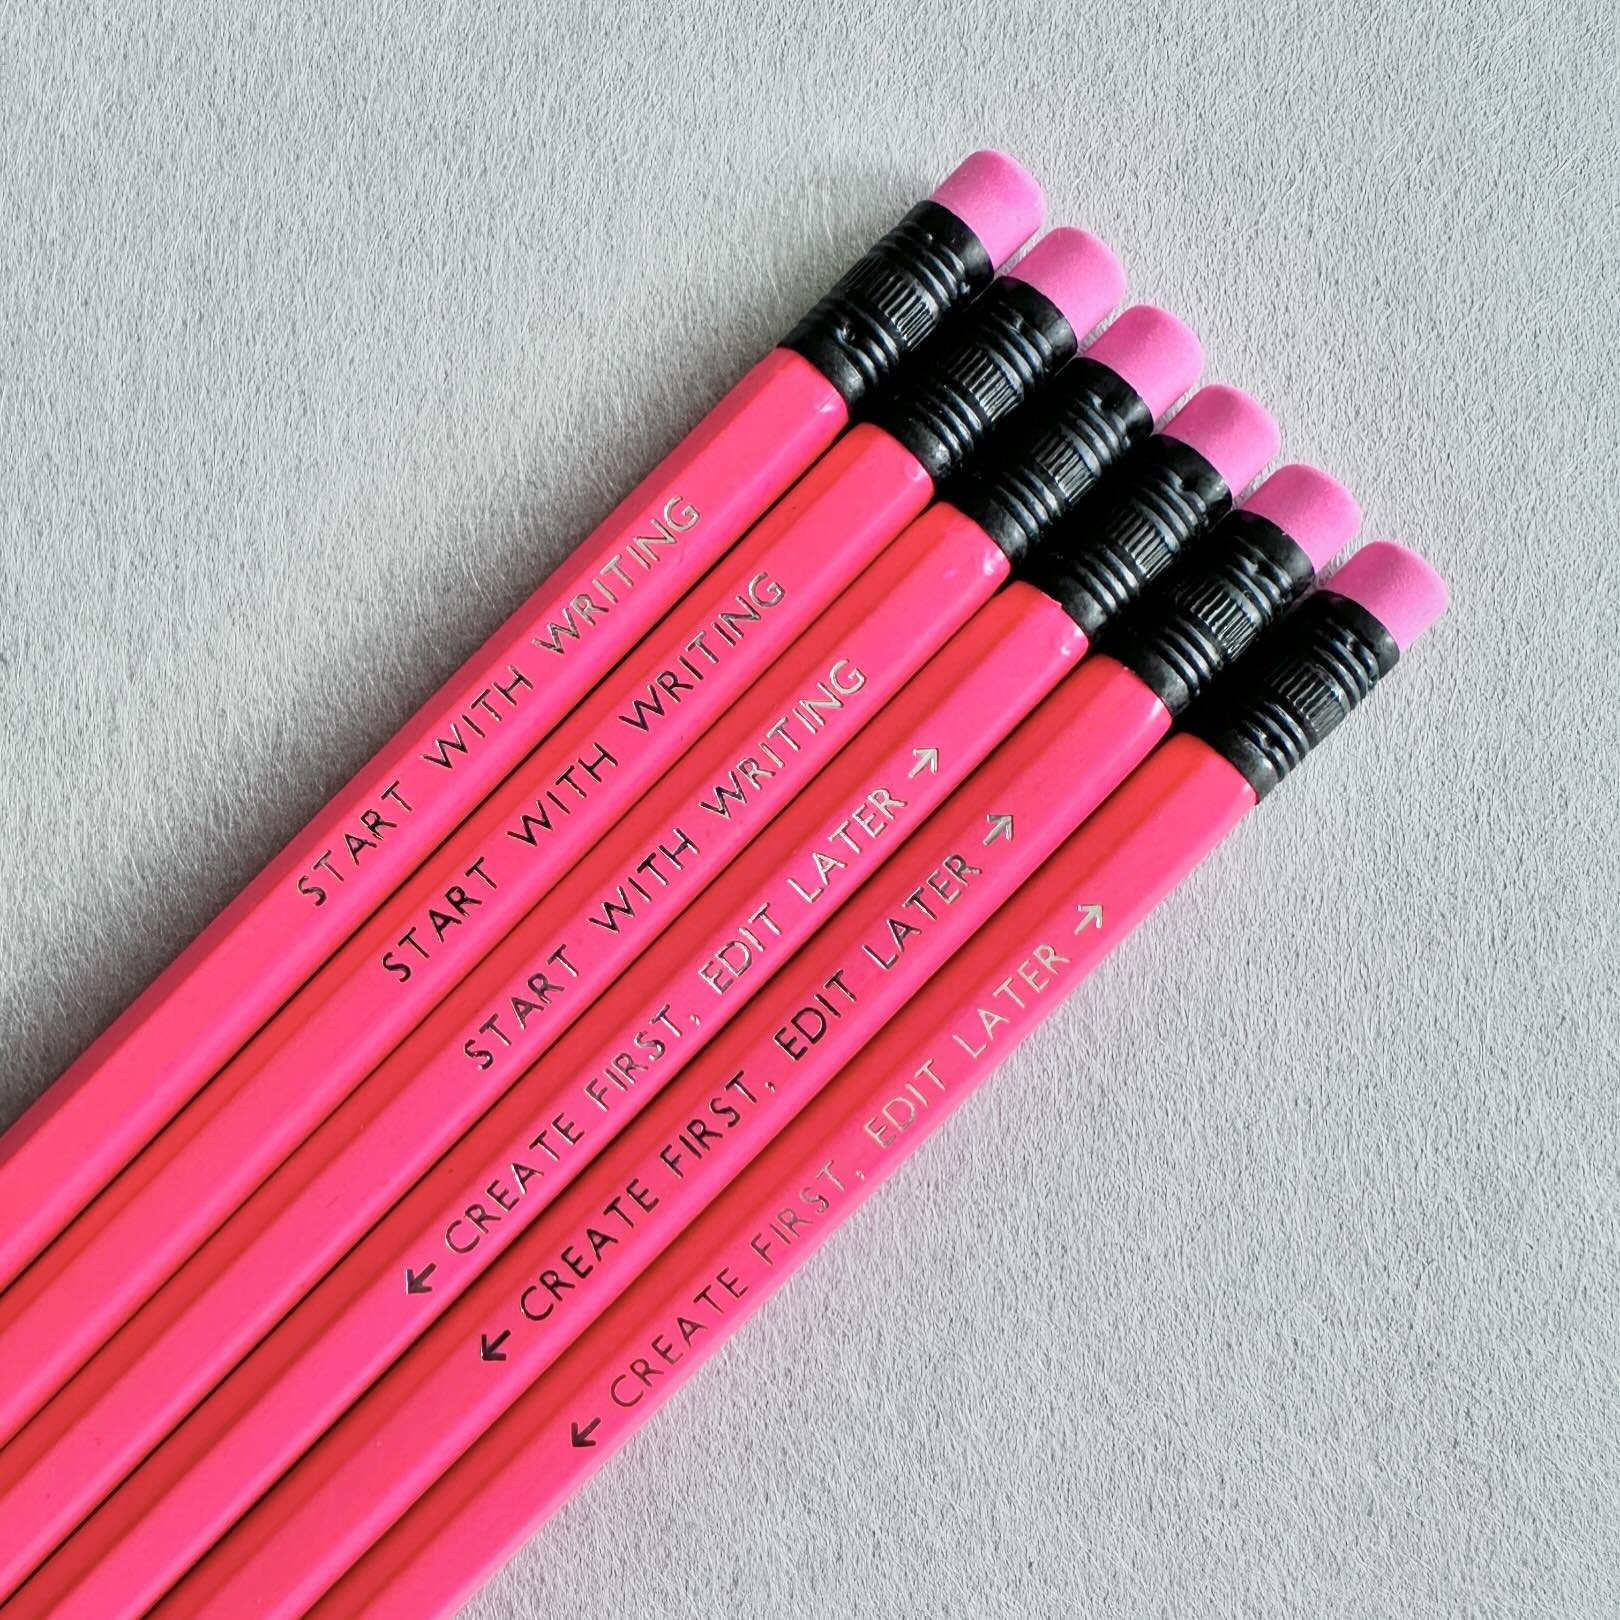 Got myself some custom pencils made to go with my book. Soon to be included with a special edition. 

Link to my book in my bio. 

Thanks @pencilmeinshop 

#pencil #neon #pink #custommade #creativity #stationery #stationeryaddict #stationerylover